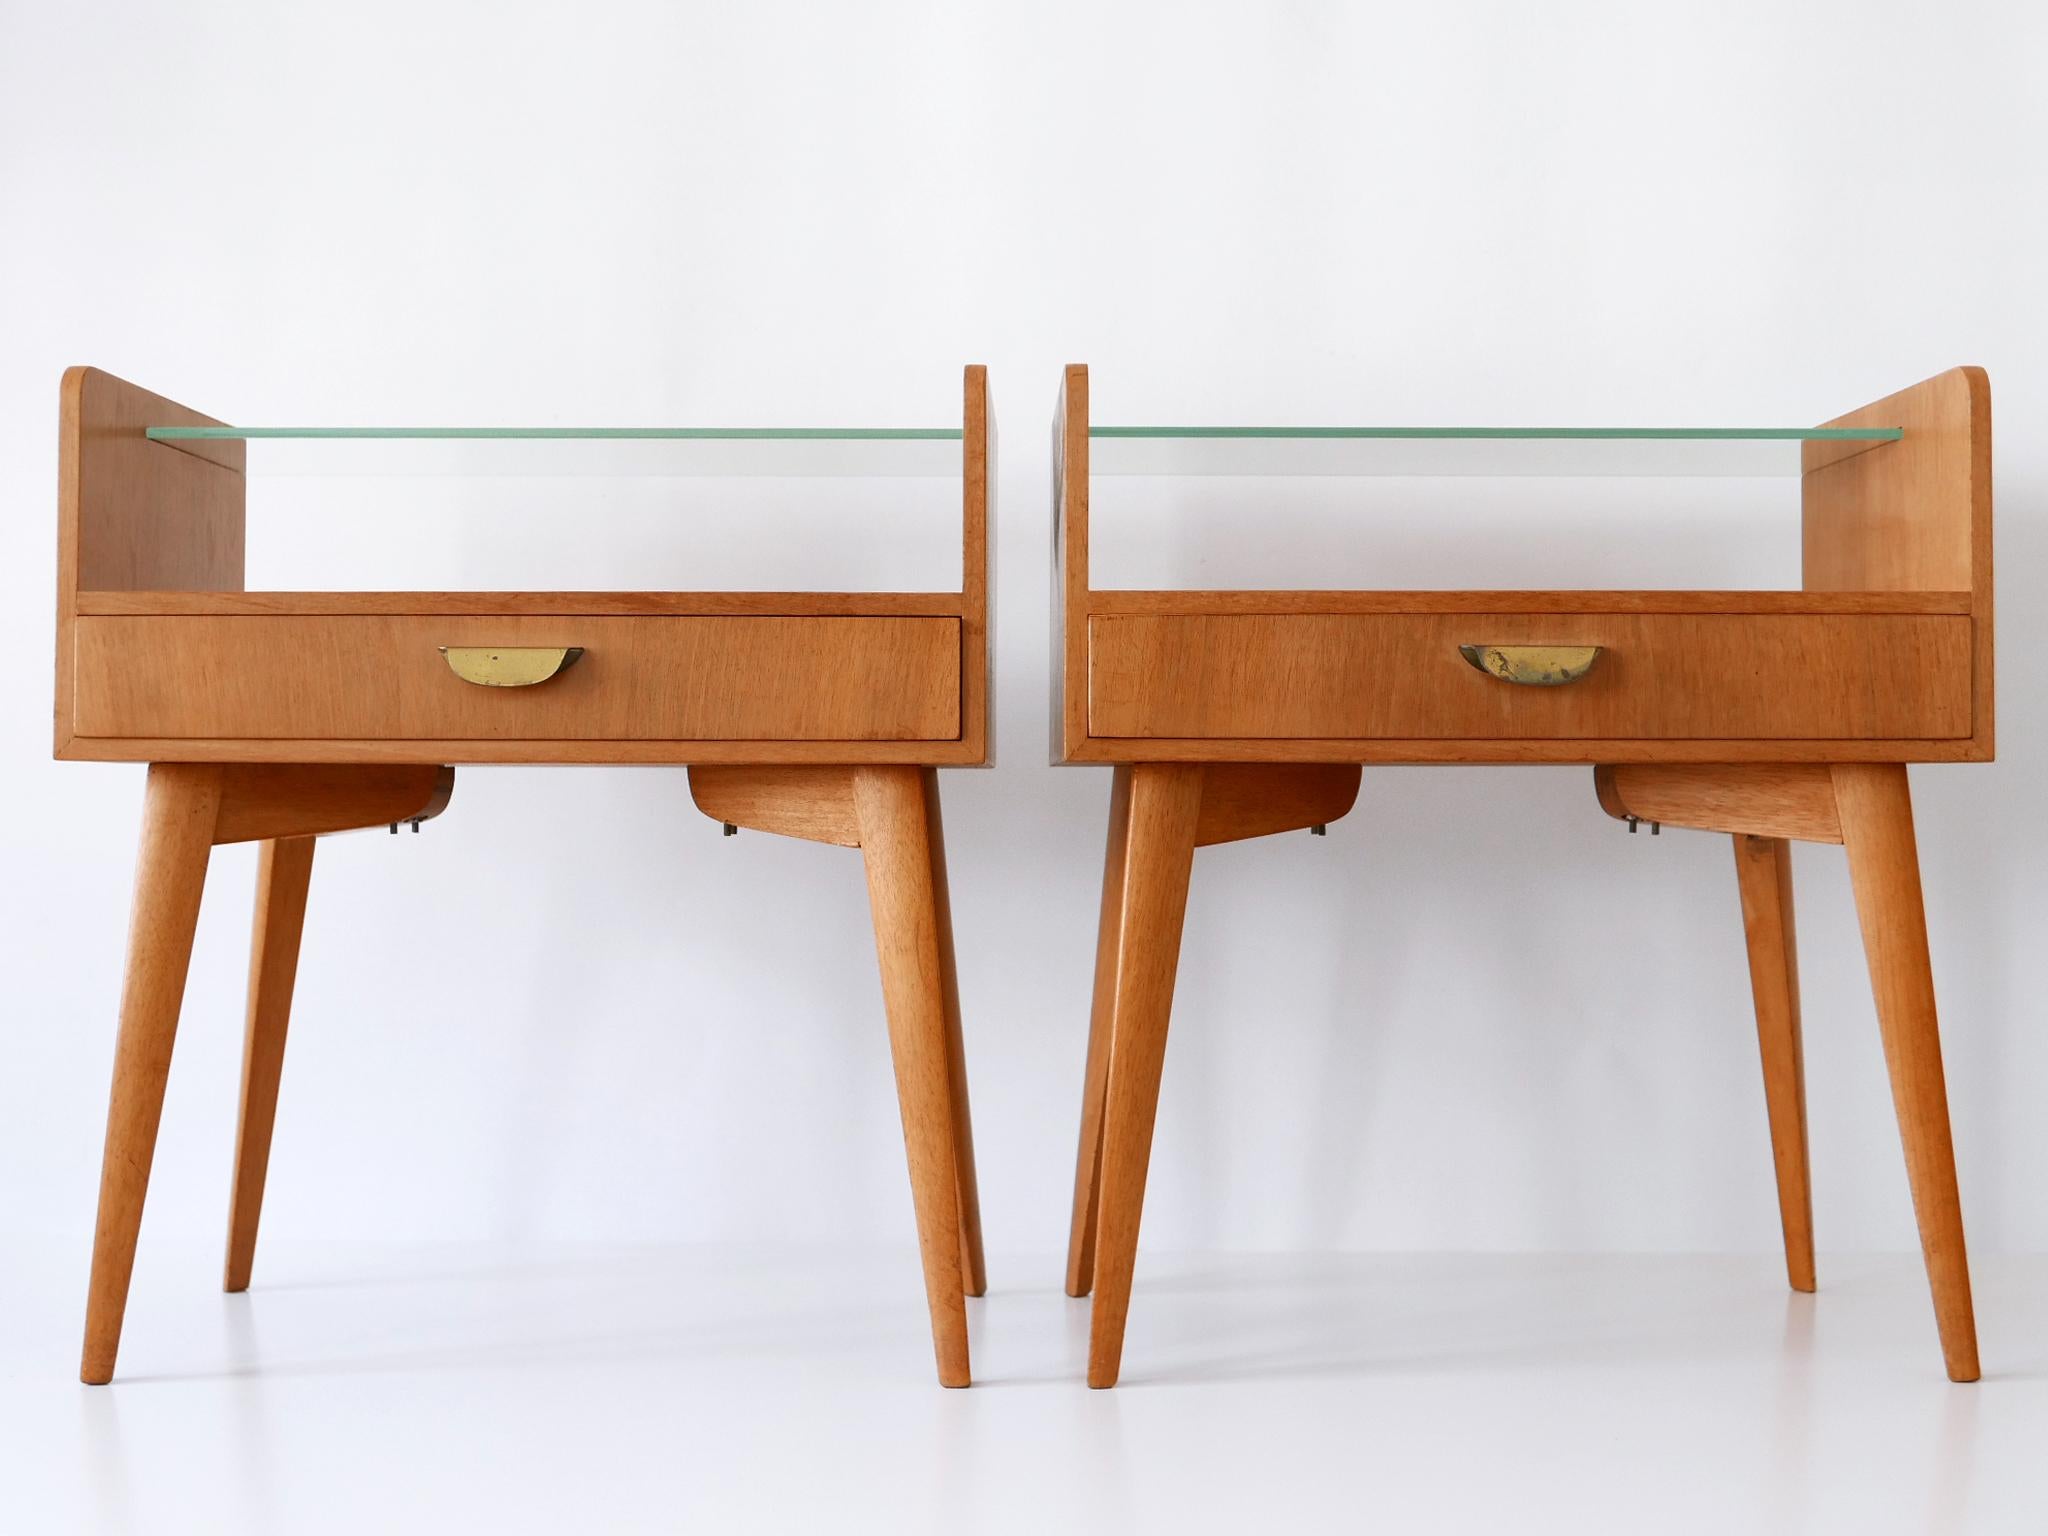 Set of two elegant and highly decorative mid century modern nightstands by WK Möbel, Germany, 1950s. Suitable for the wall mounting. With metal label inside the drawers.

Executed in walnut and brass.

The nightstand will be disassemble for safe